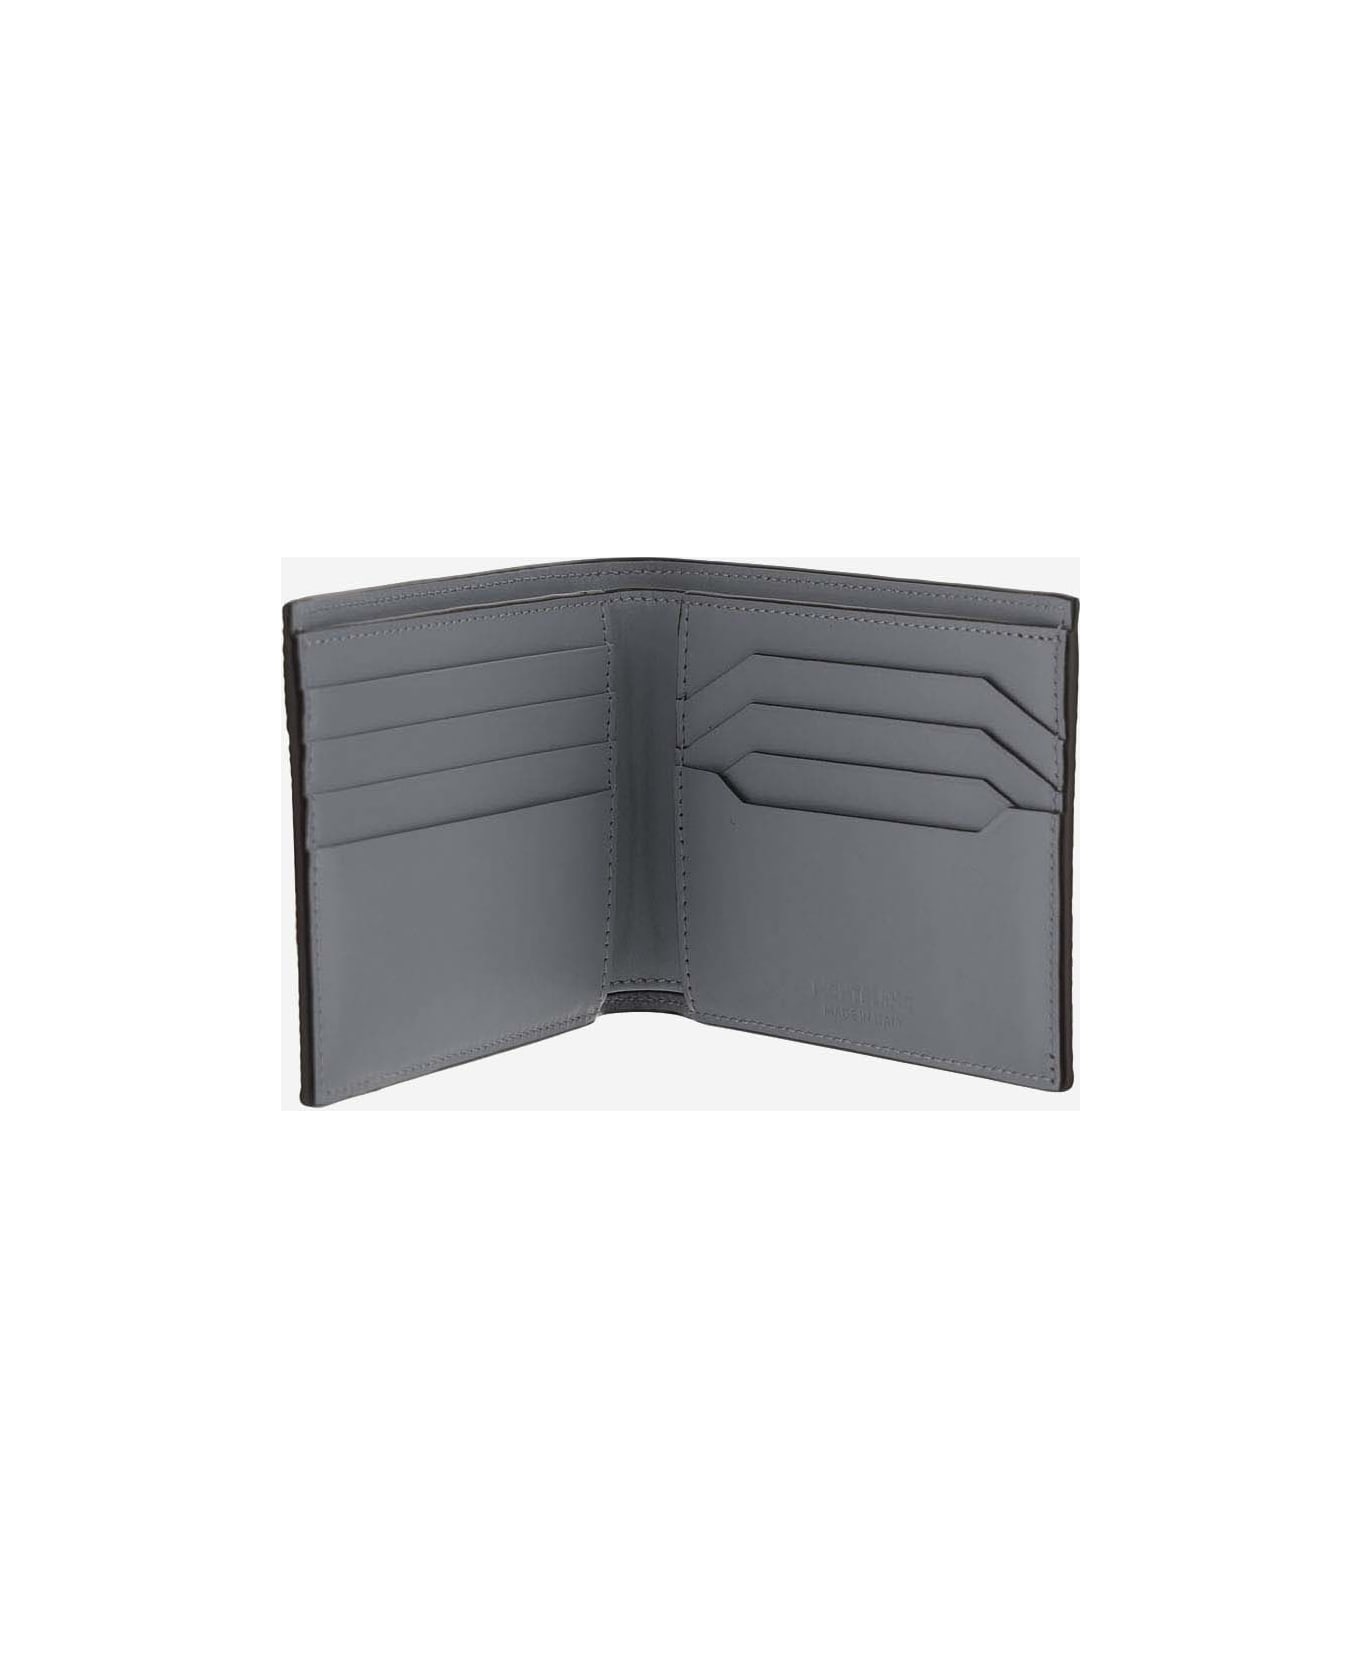 Montblanc Wallet 8 Compartments 4810 - Grey